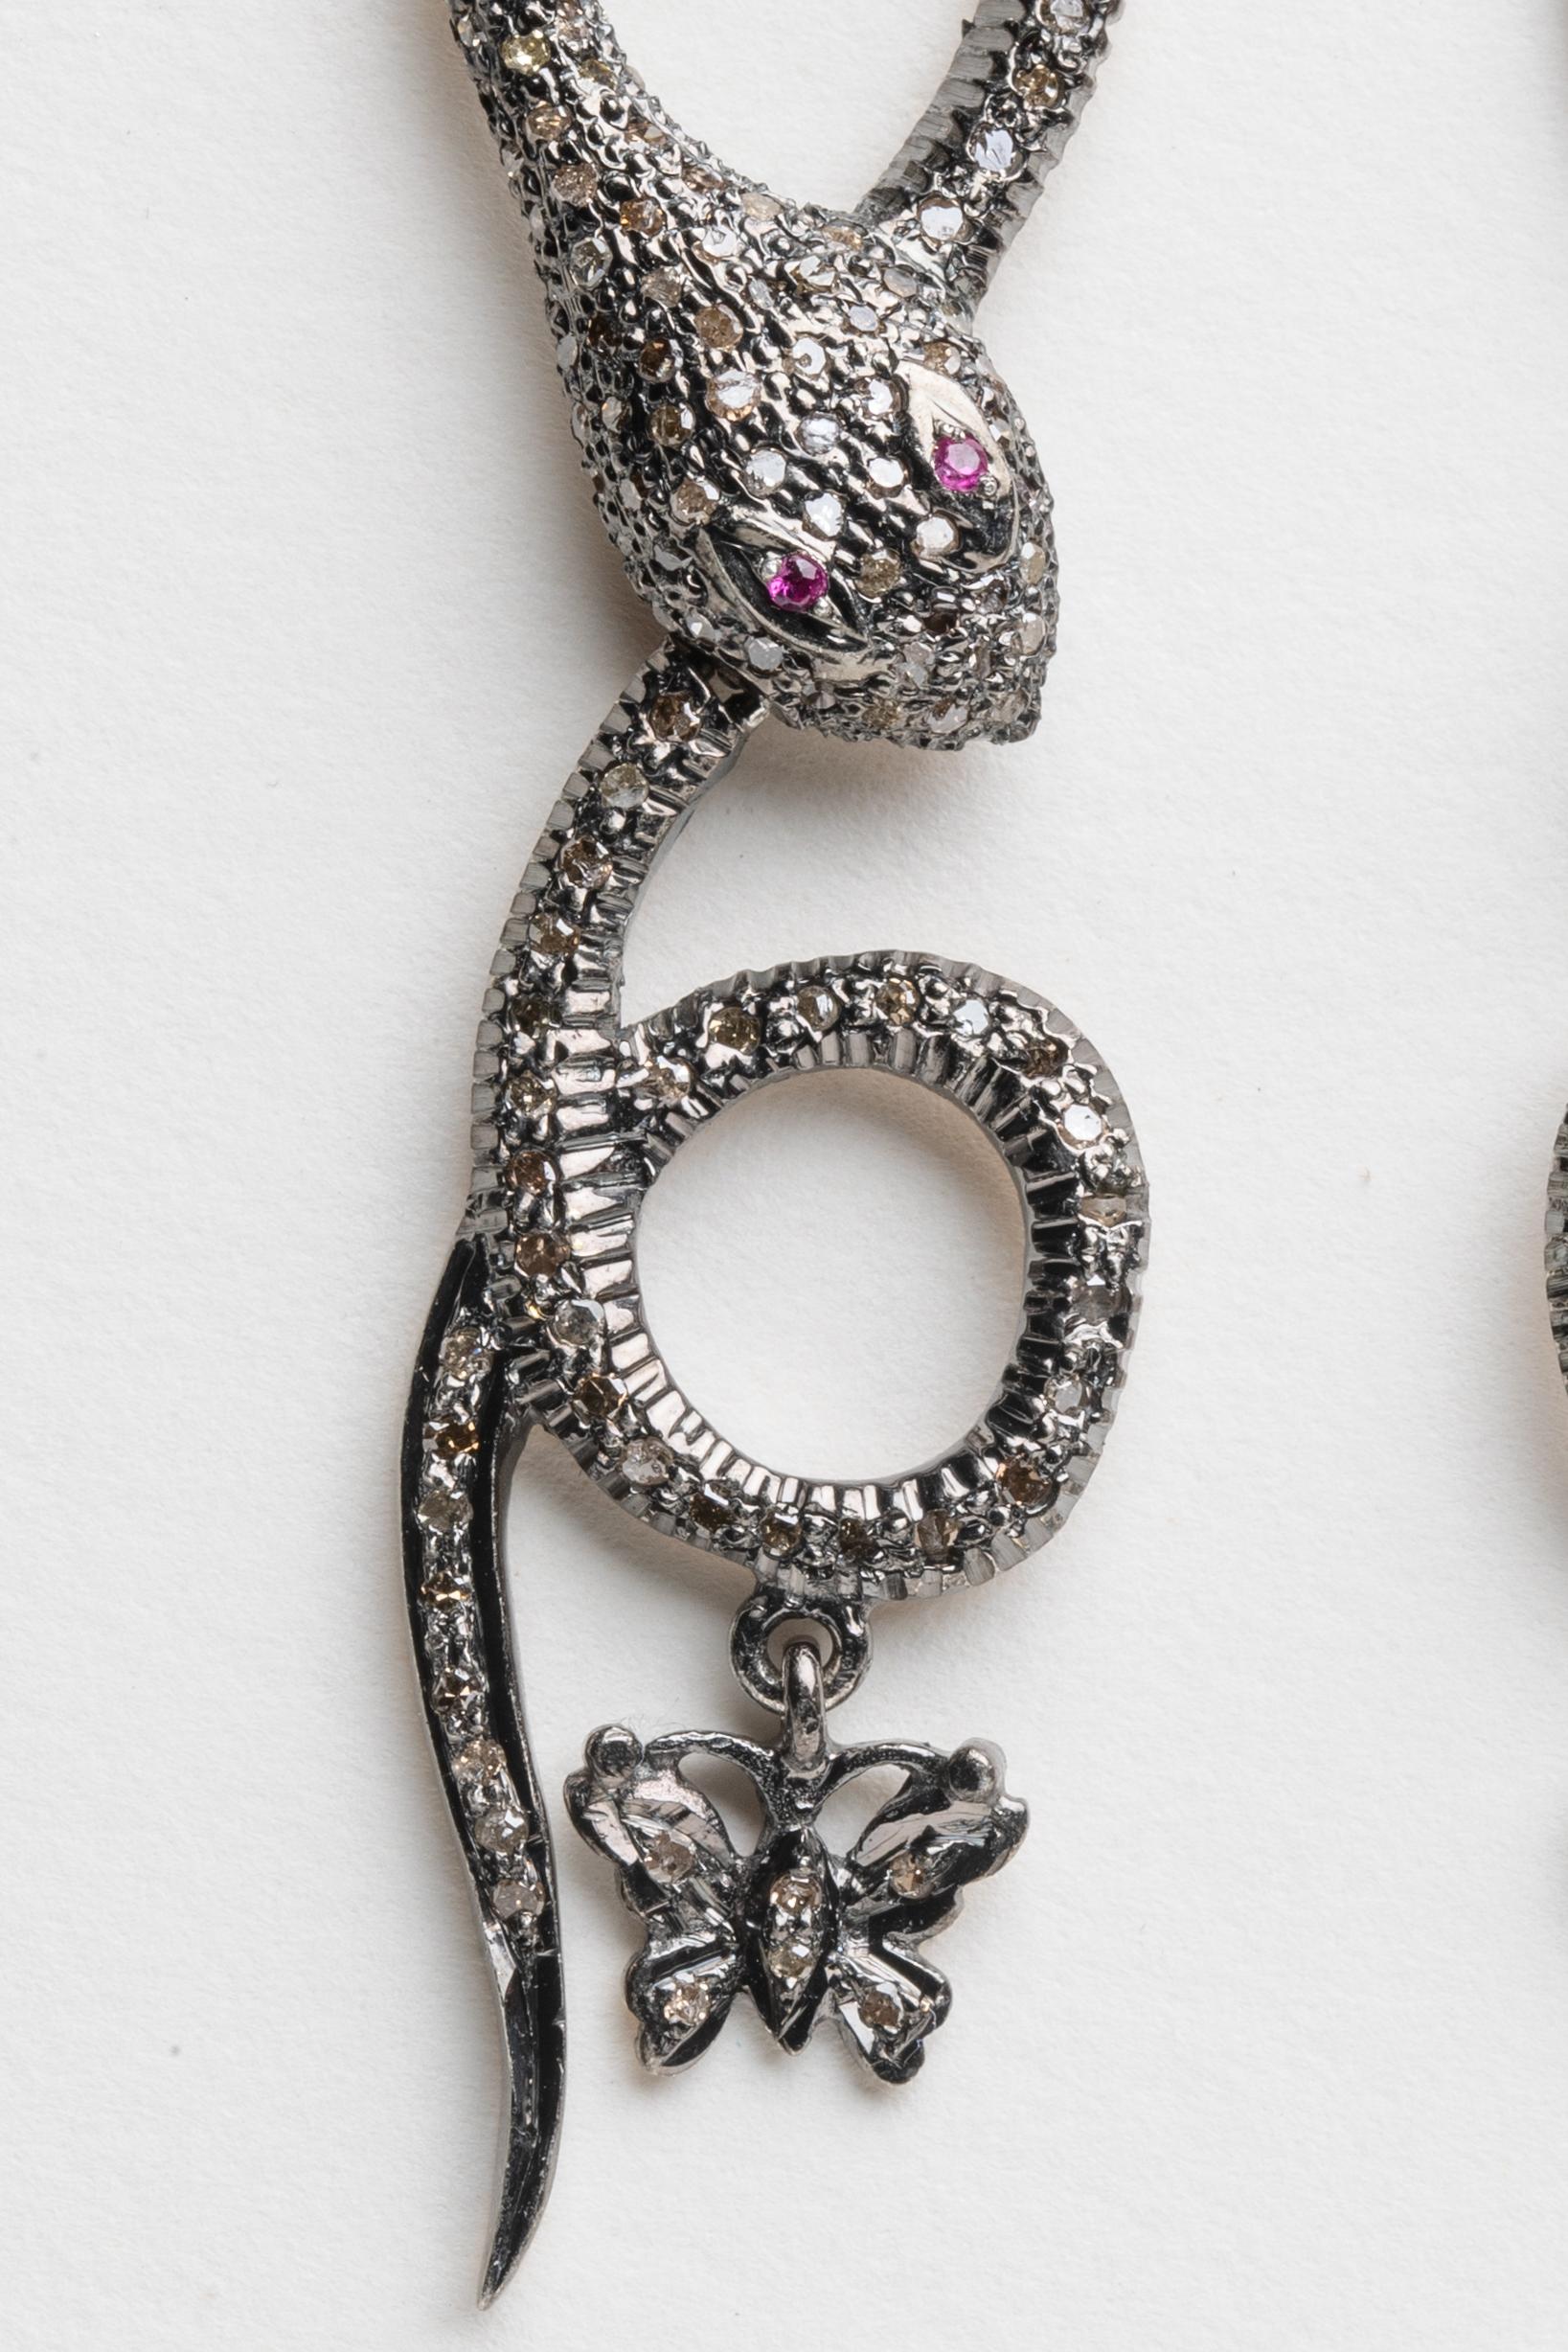 An unusual pair of snake earrings coiled and eyeing the dangling butterfly below.  Pave`-set diamonds and ruby eyes in an oxidized sterling silver with 18K gold post for pierced ears.  Carat weight of diamonds is 2.72.